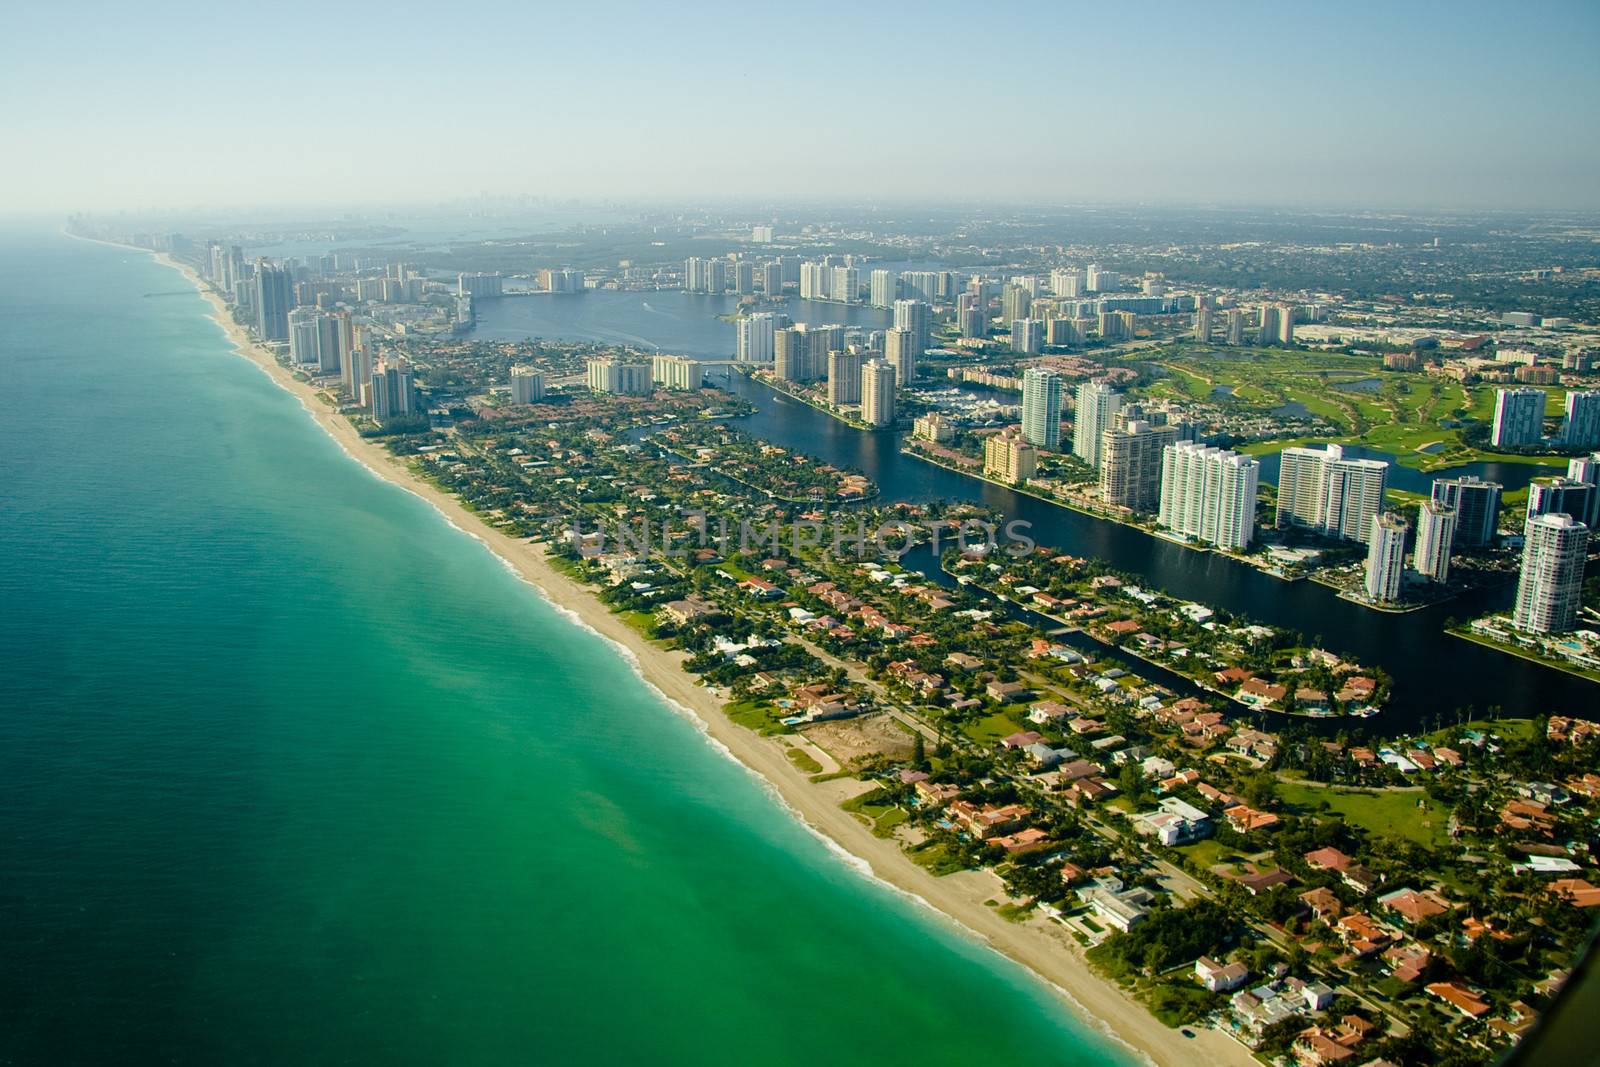 An aerial view of the seashore in Miami.